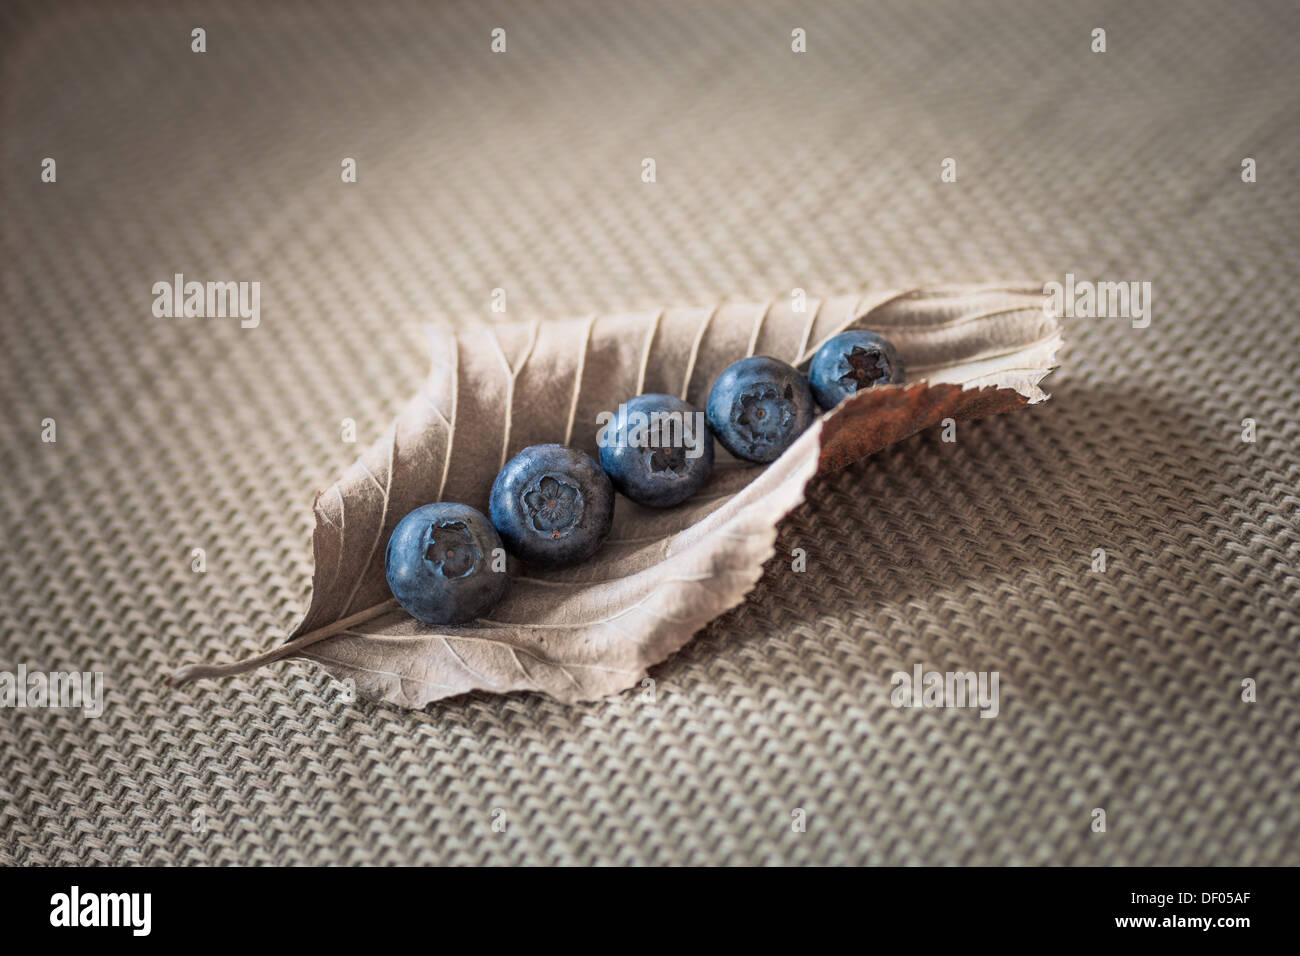 Juicy Blueberries nestled within a dried leaf on linen Stock Photo